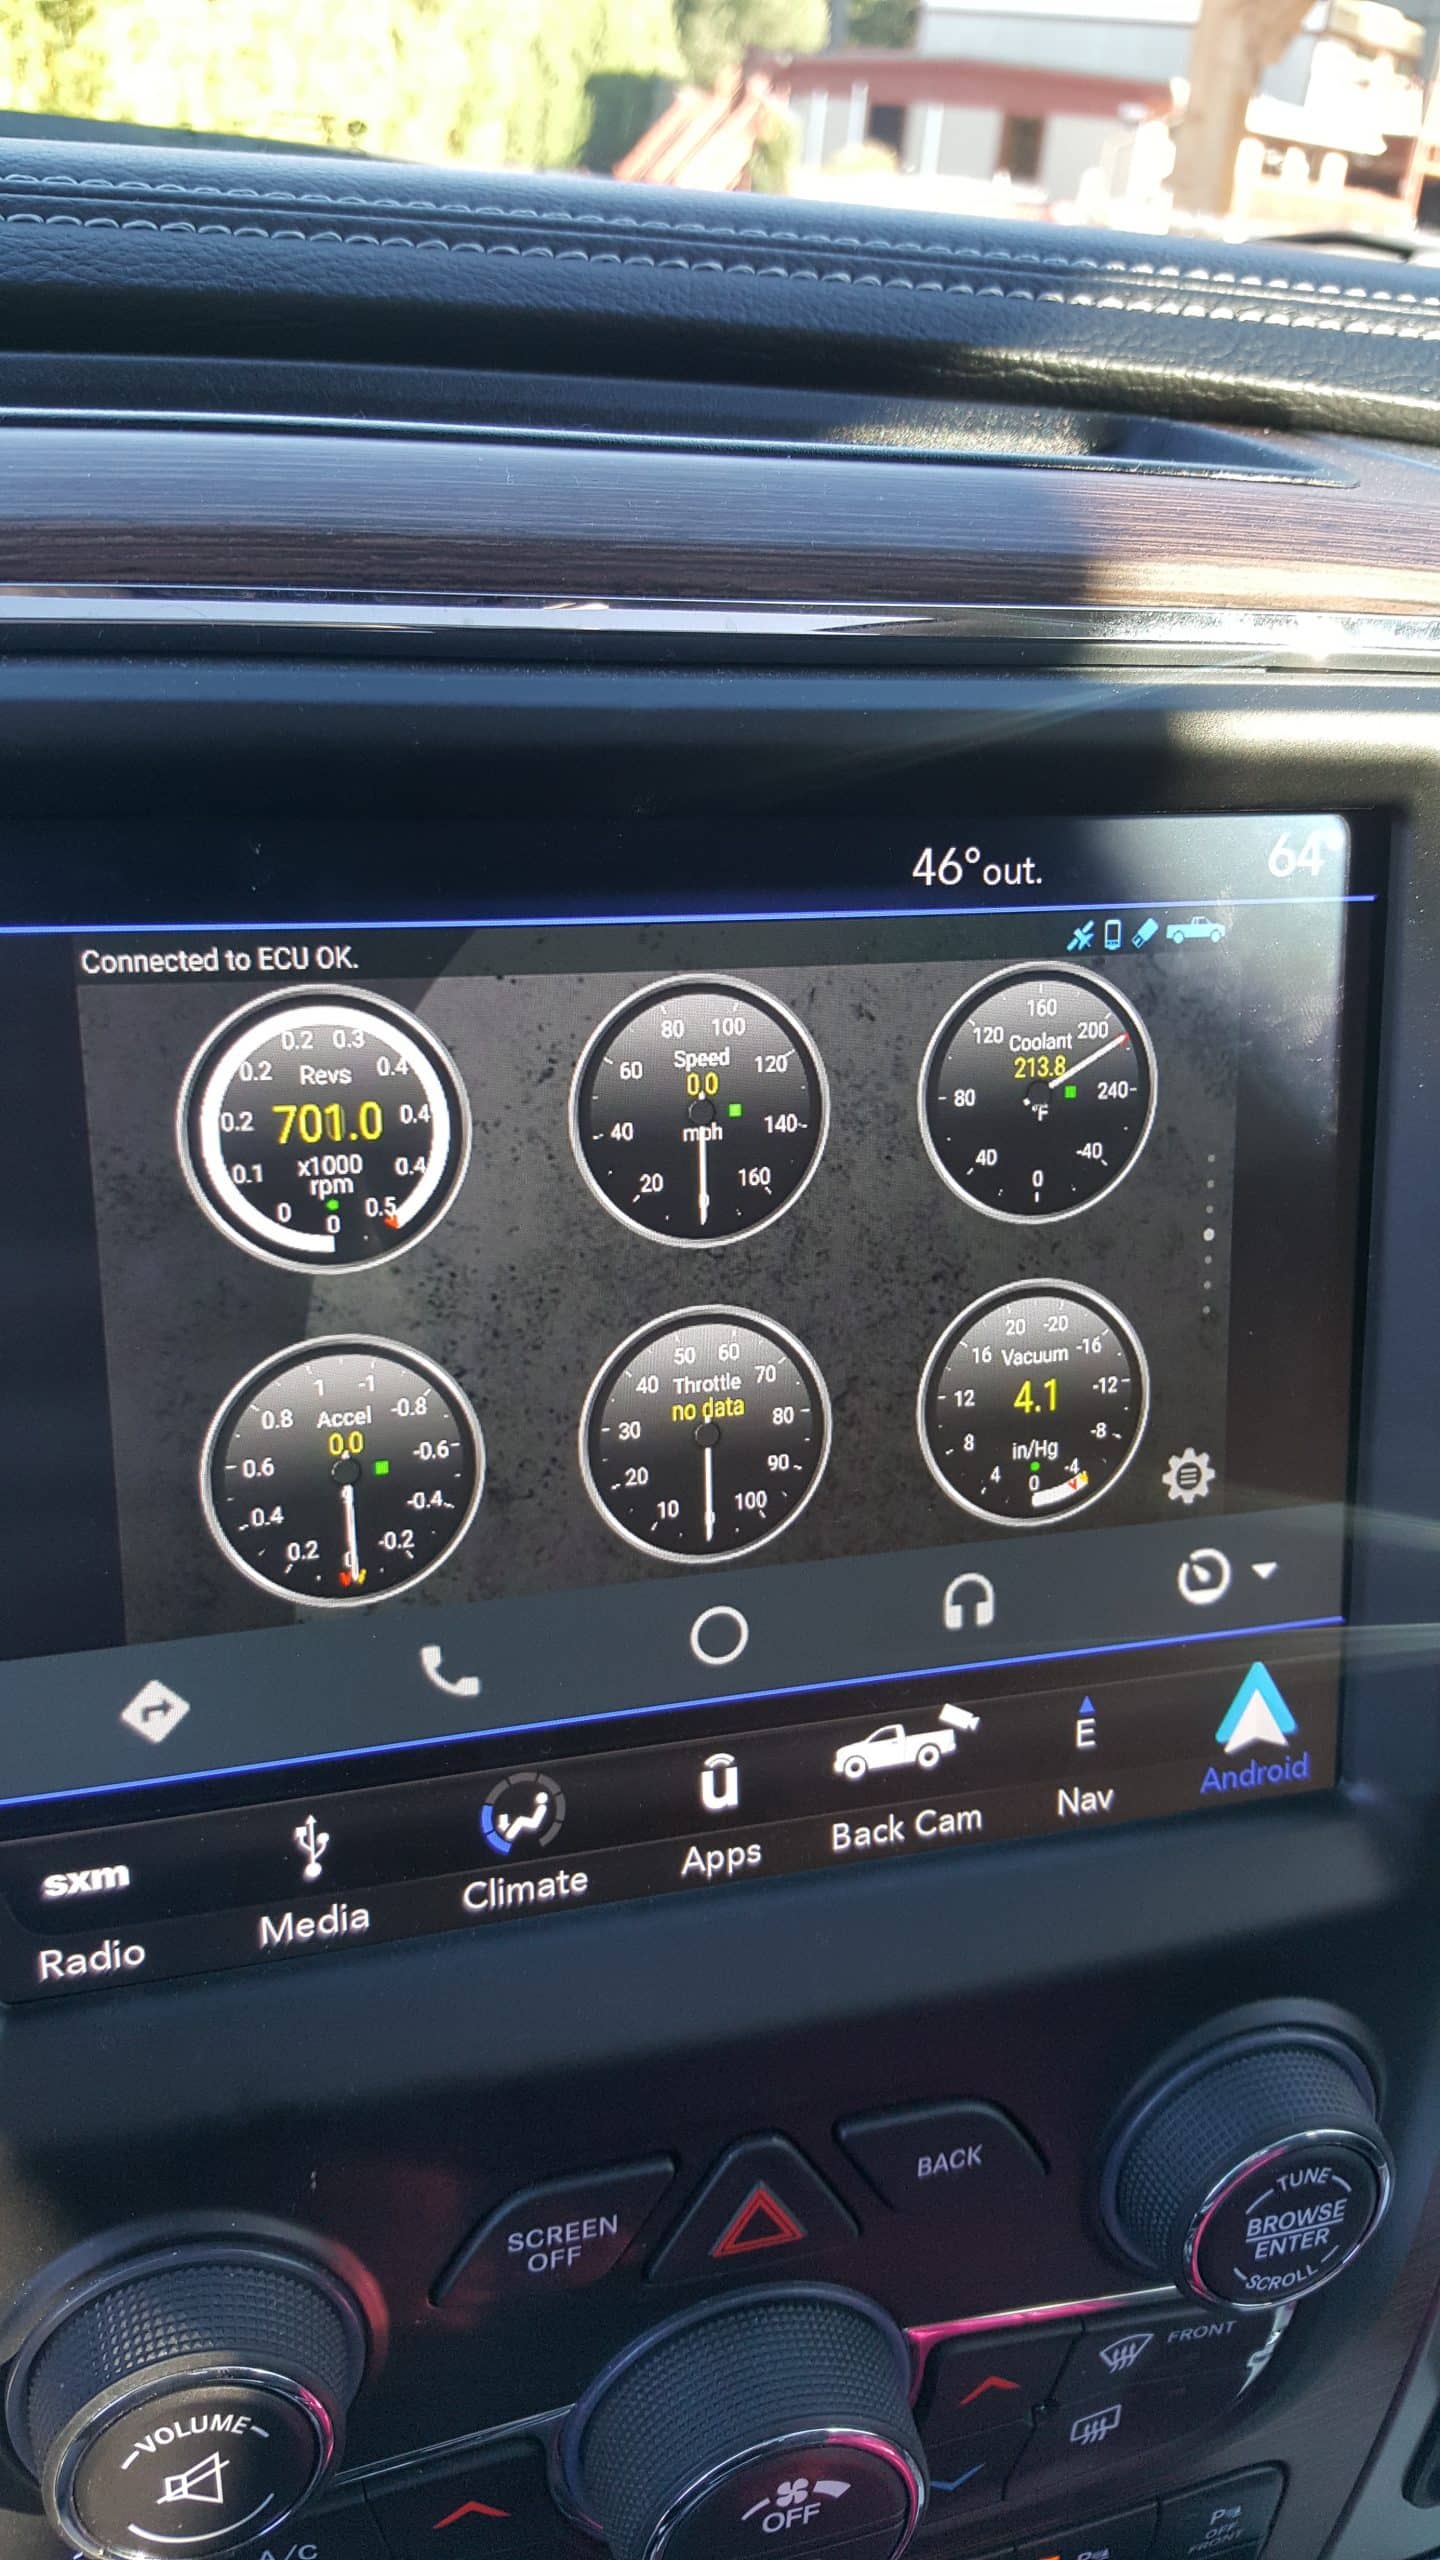 How to get screen mirroring and gauges on Android auto